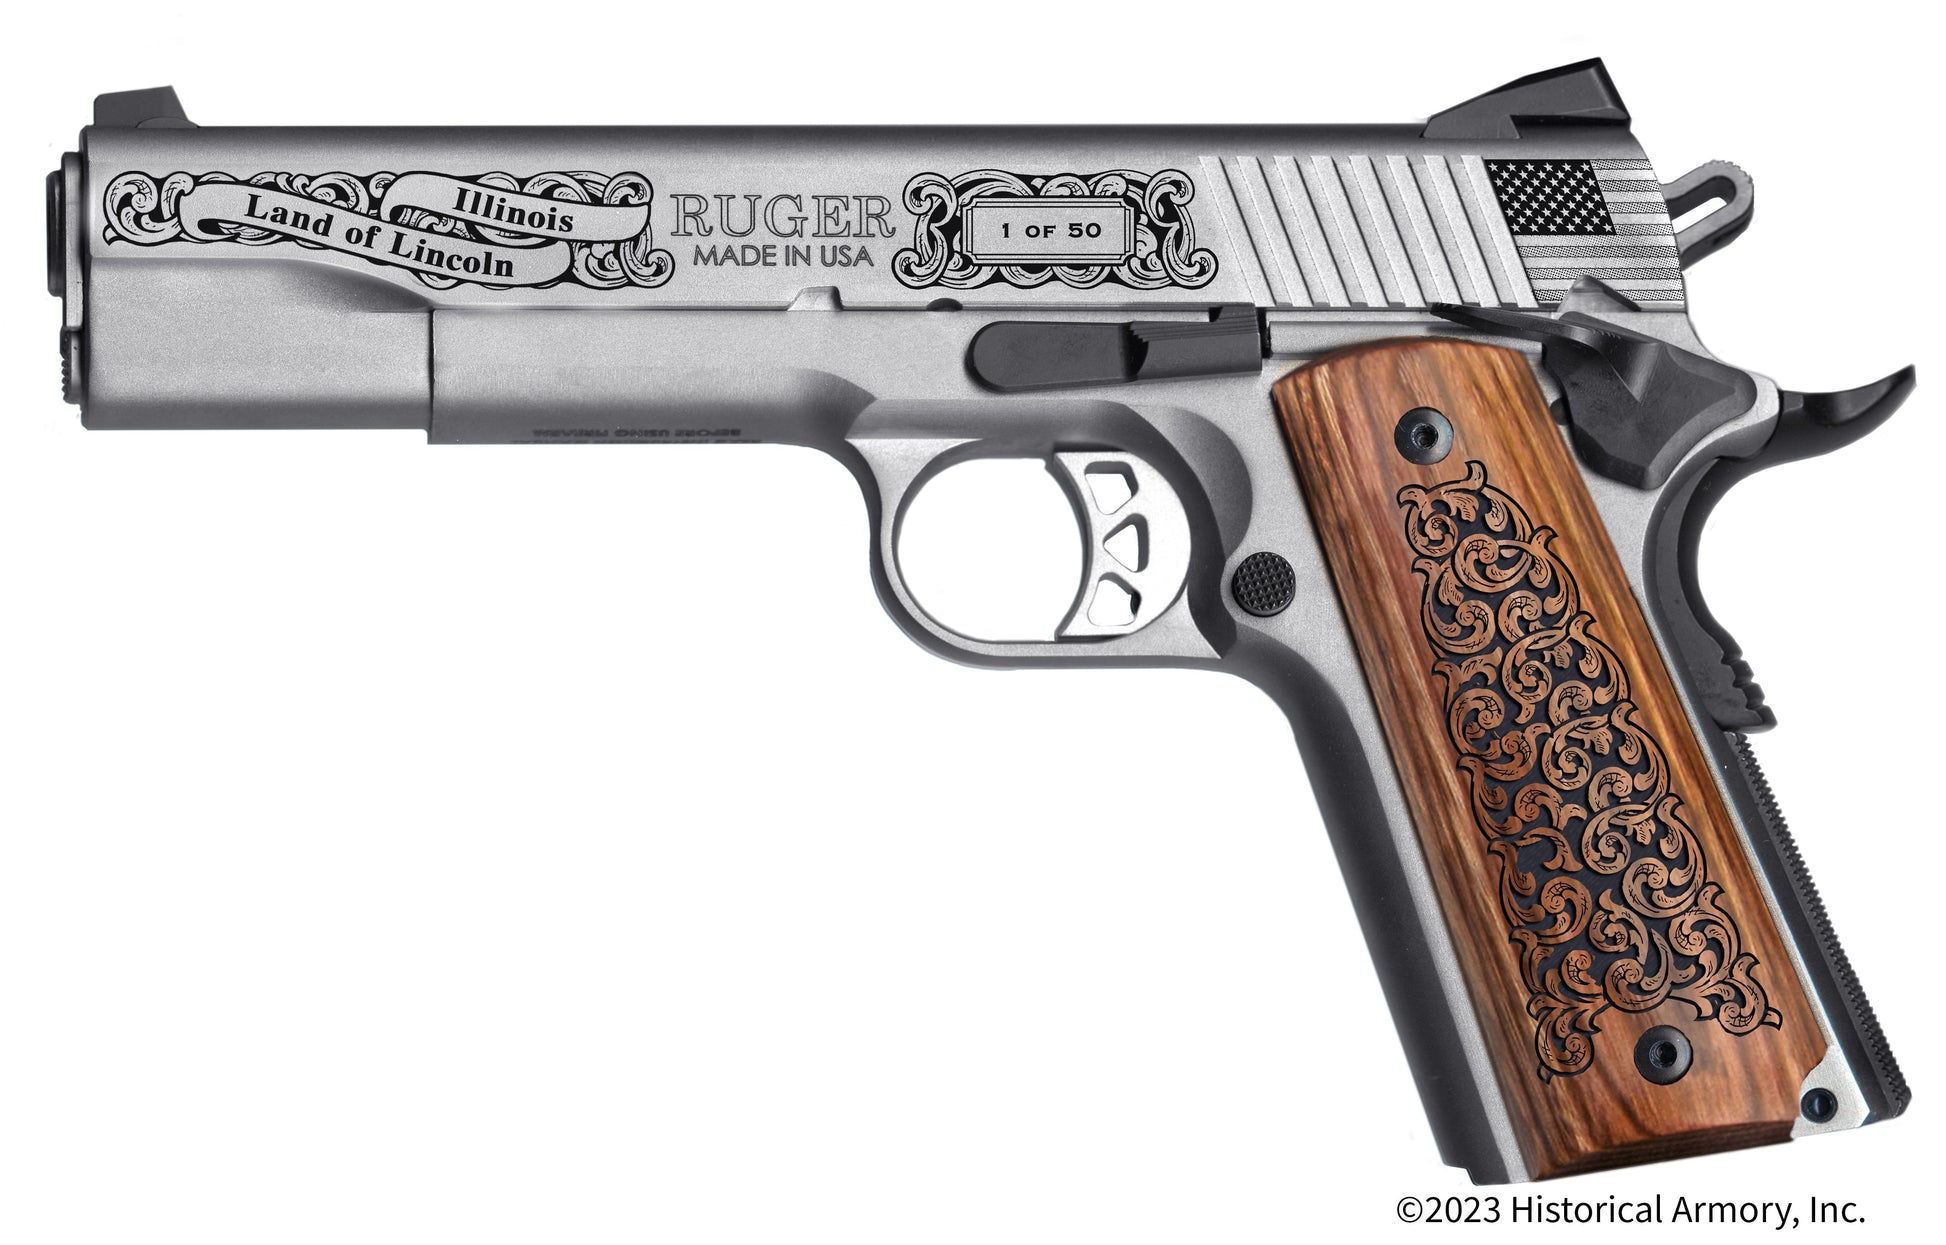 Fulton County Illinois Engraved .45 Auto Ruger 1911